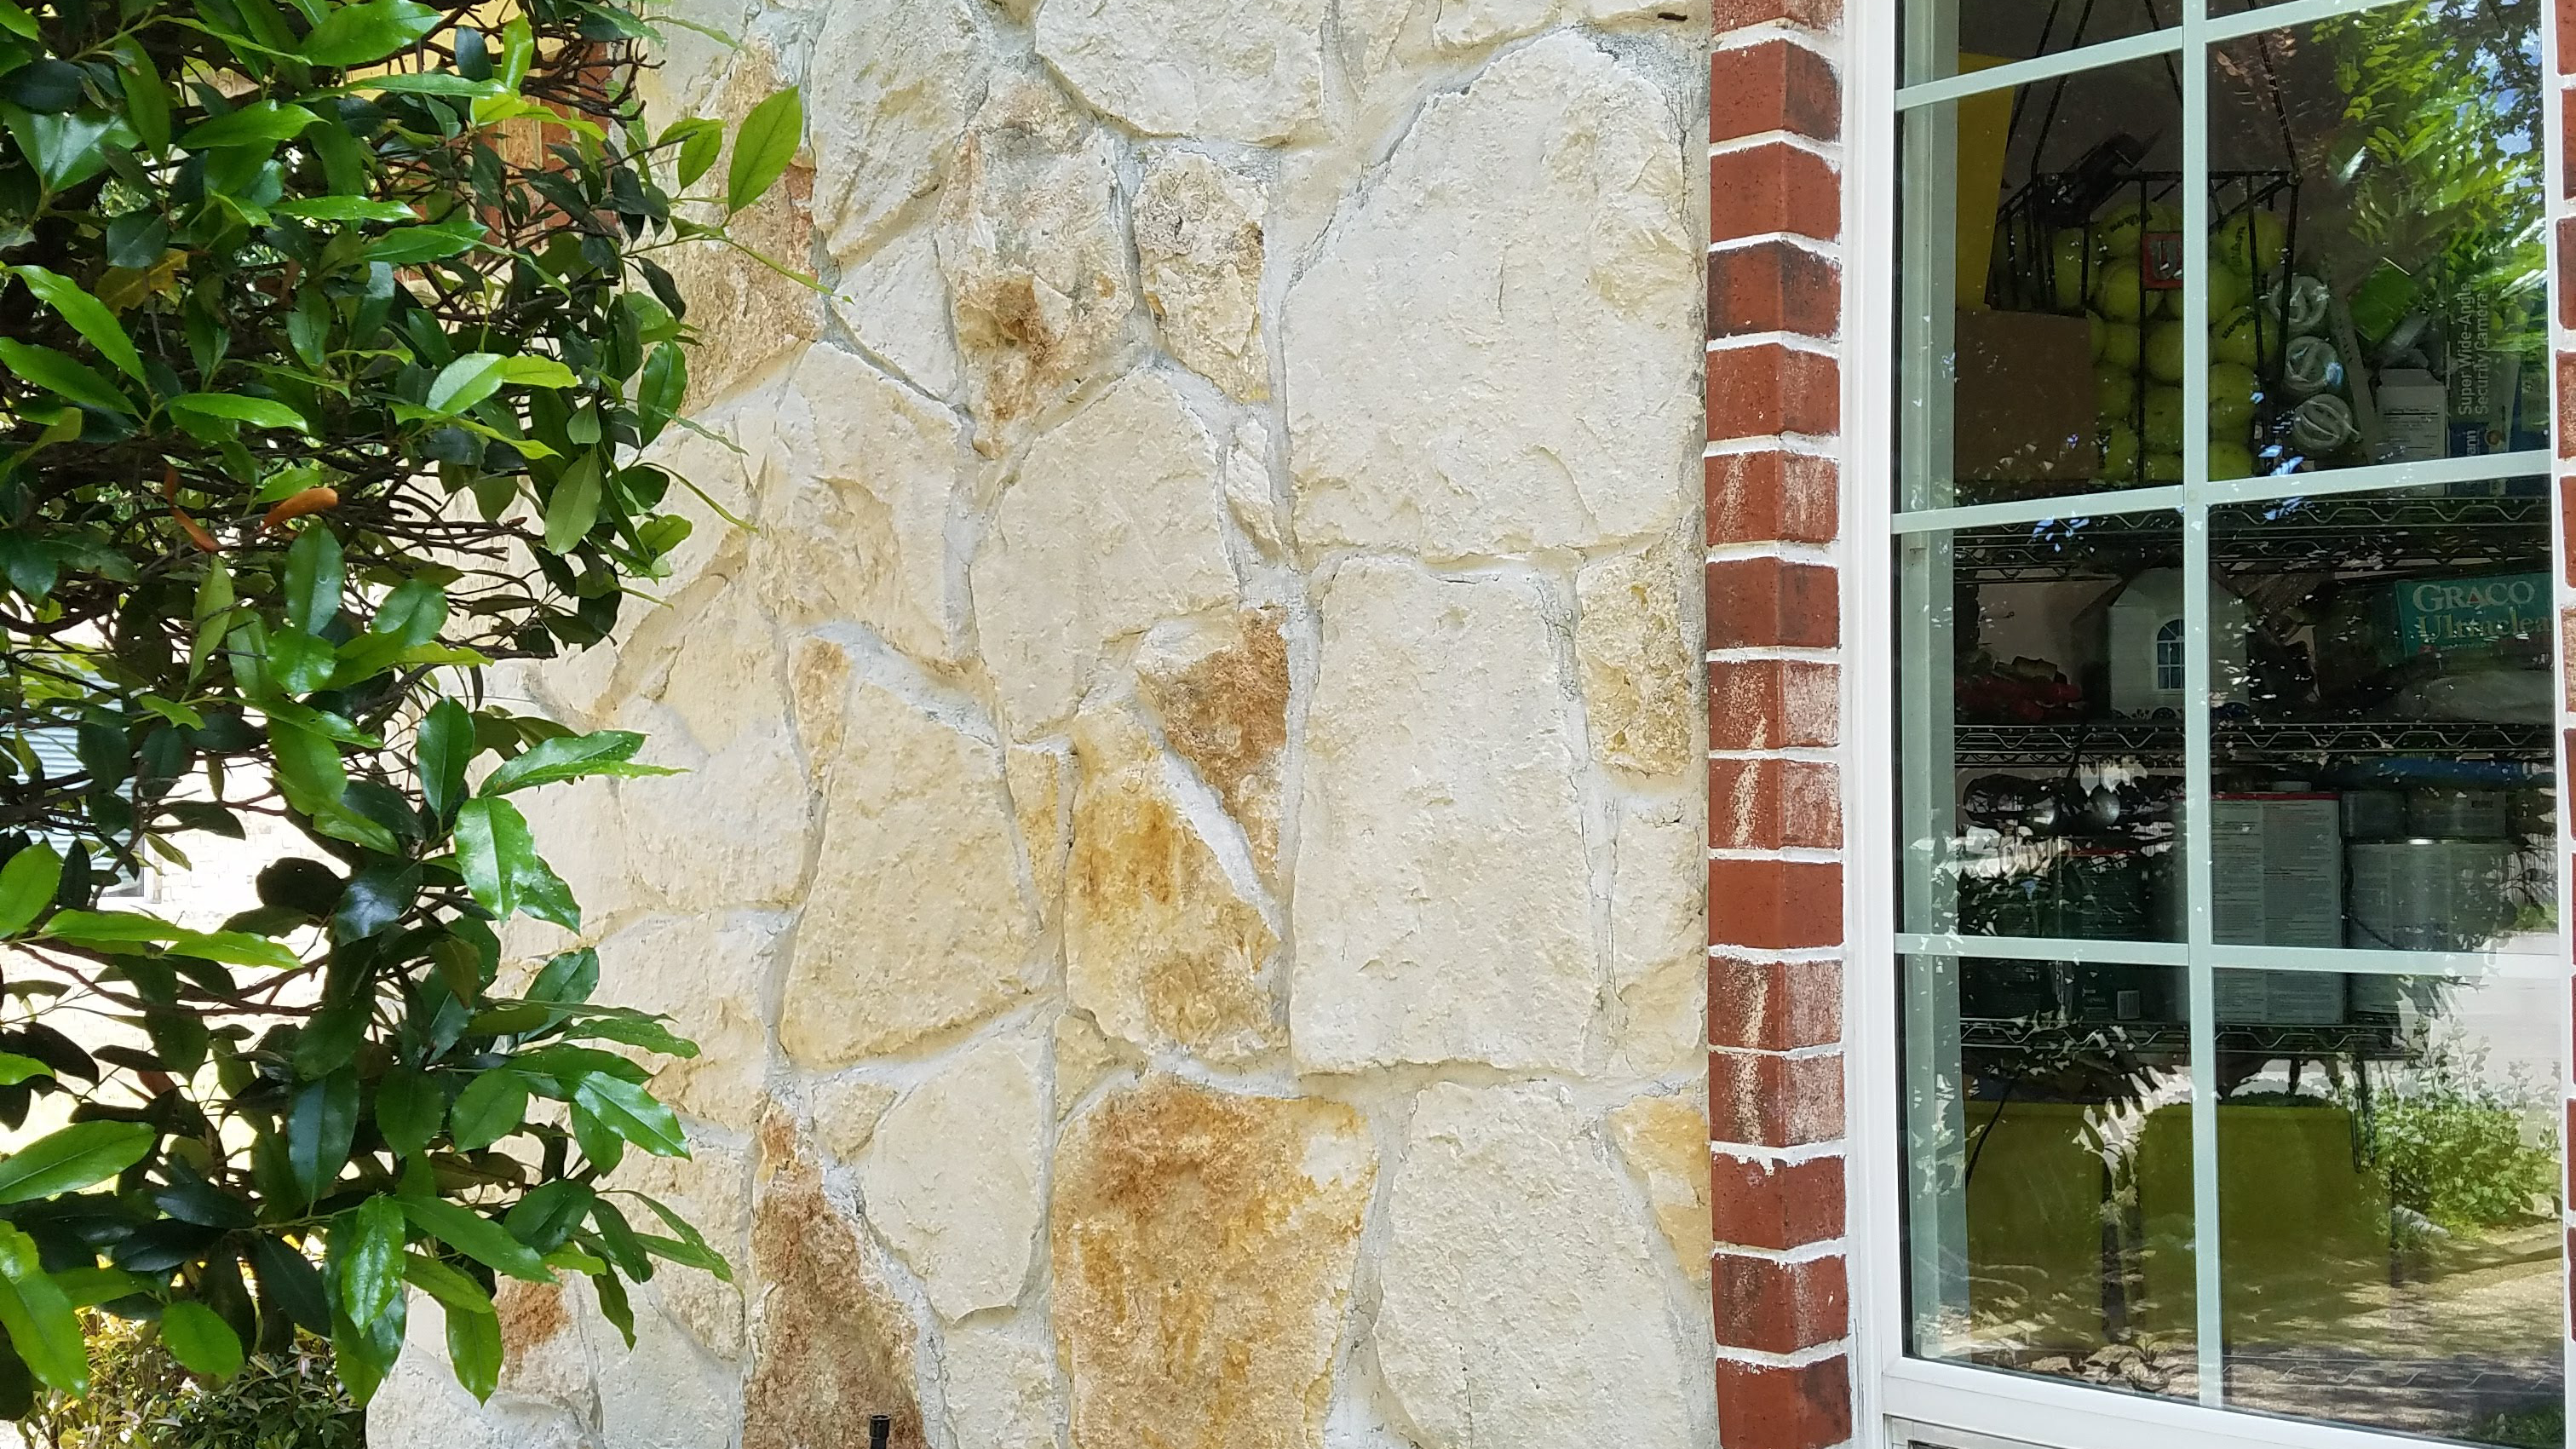 An image of a stone wall after being power washed.